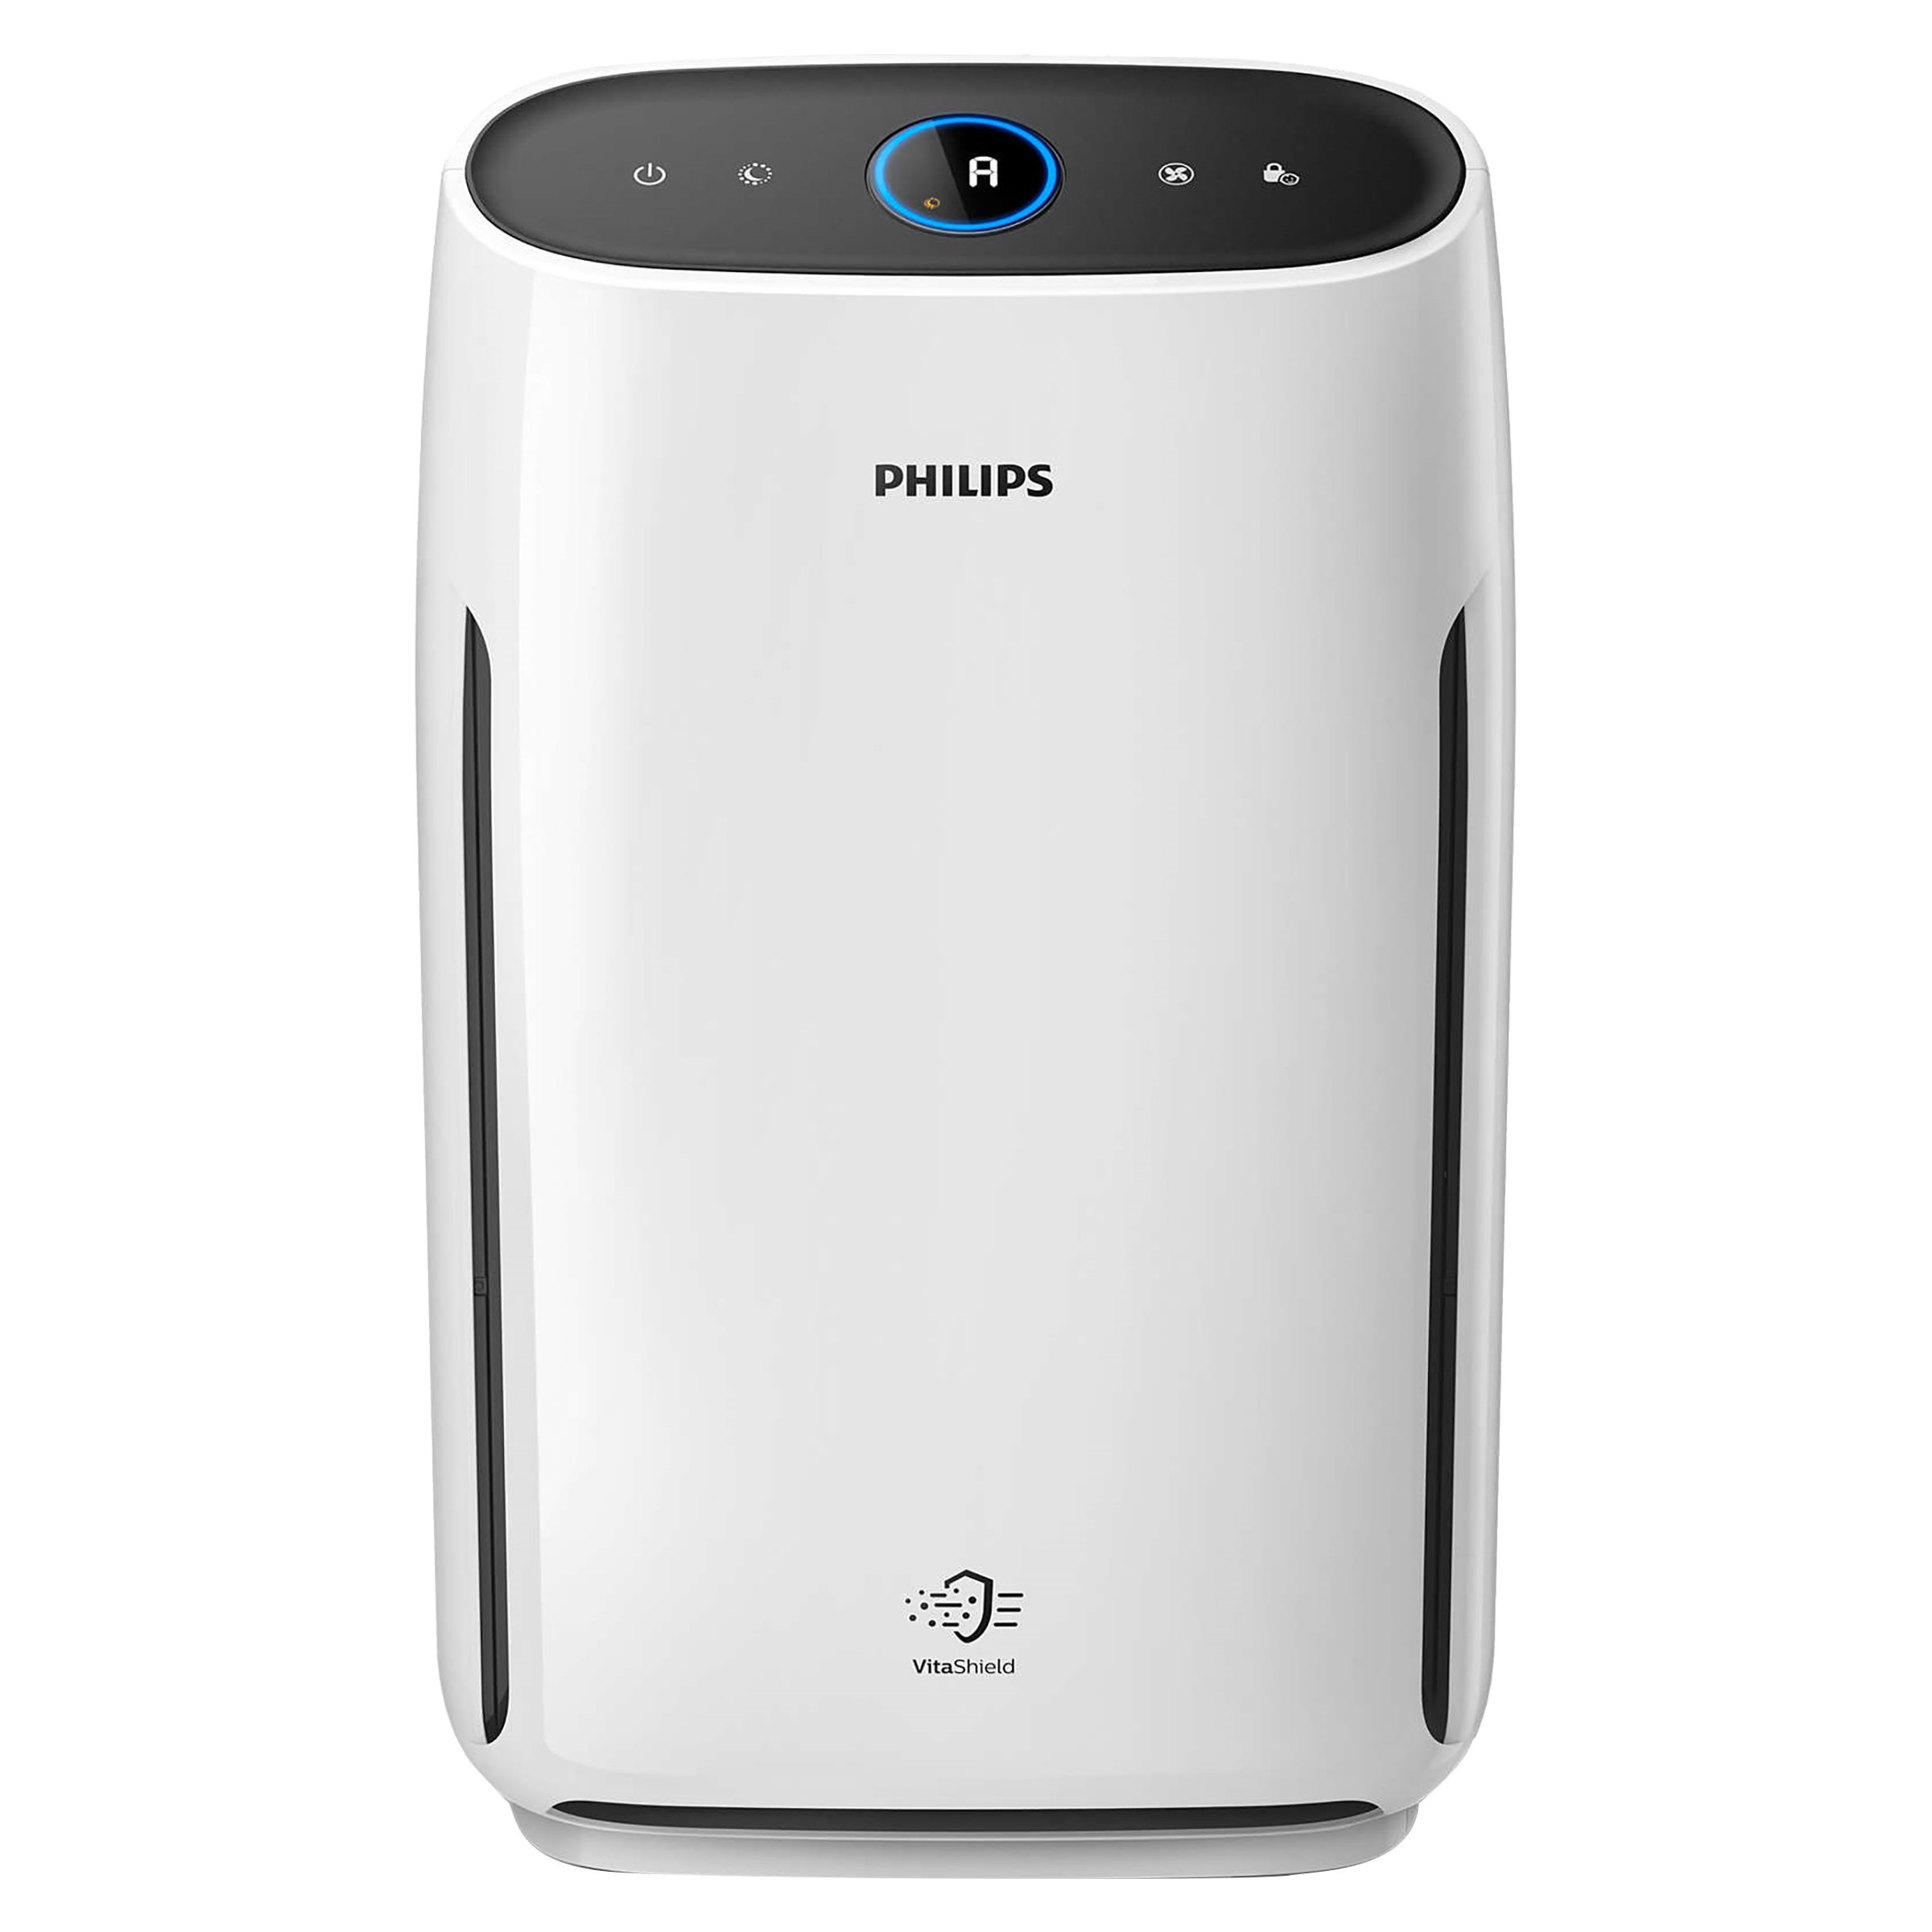 philips-ac1215-20-air-purifier-removes-airborne-pollutants-4-stage